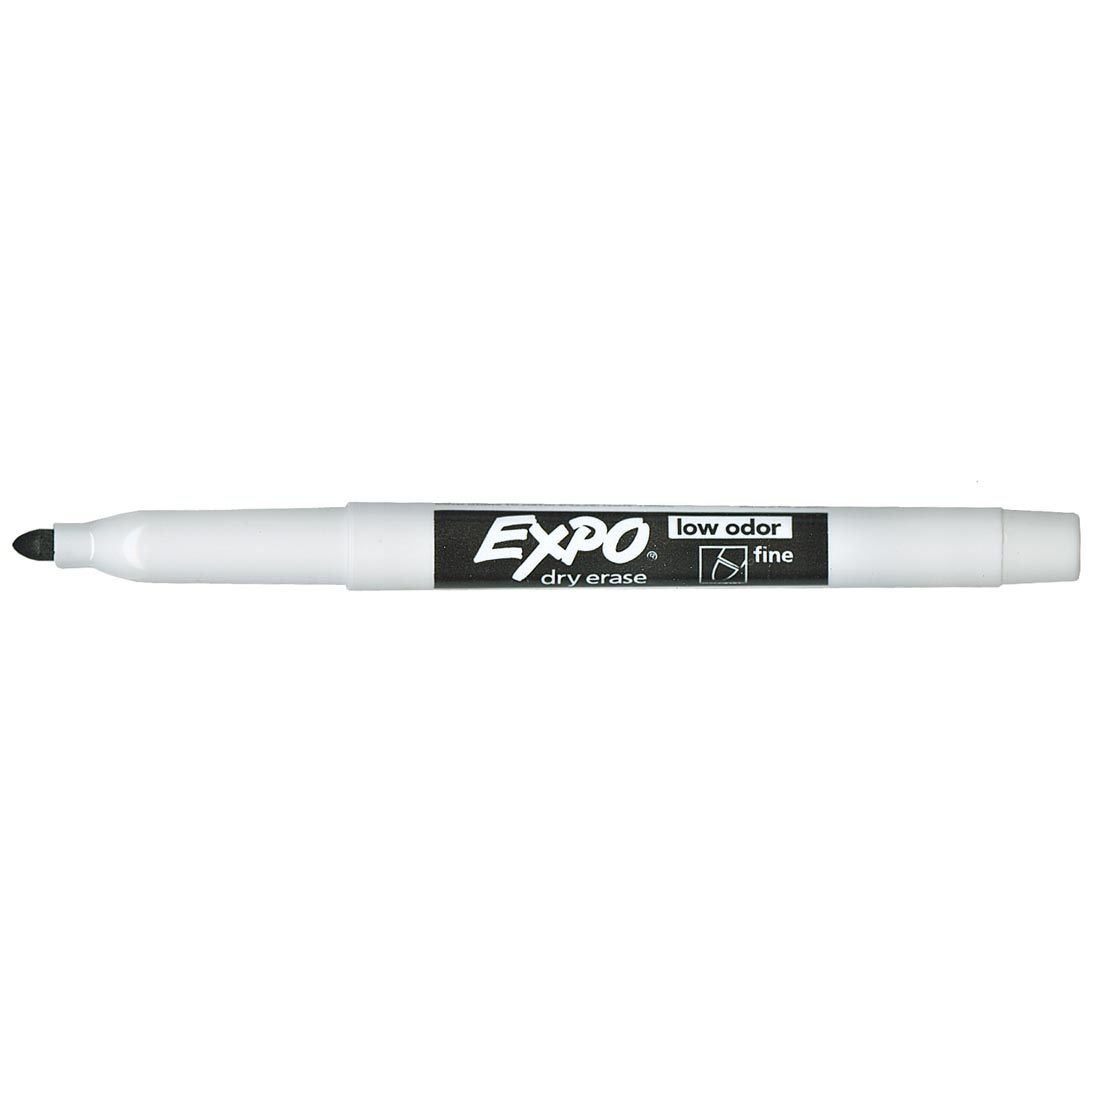 Black Expo Low Odor Fine Tip Dry Erase Marker without cap